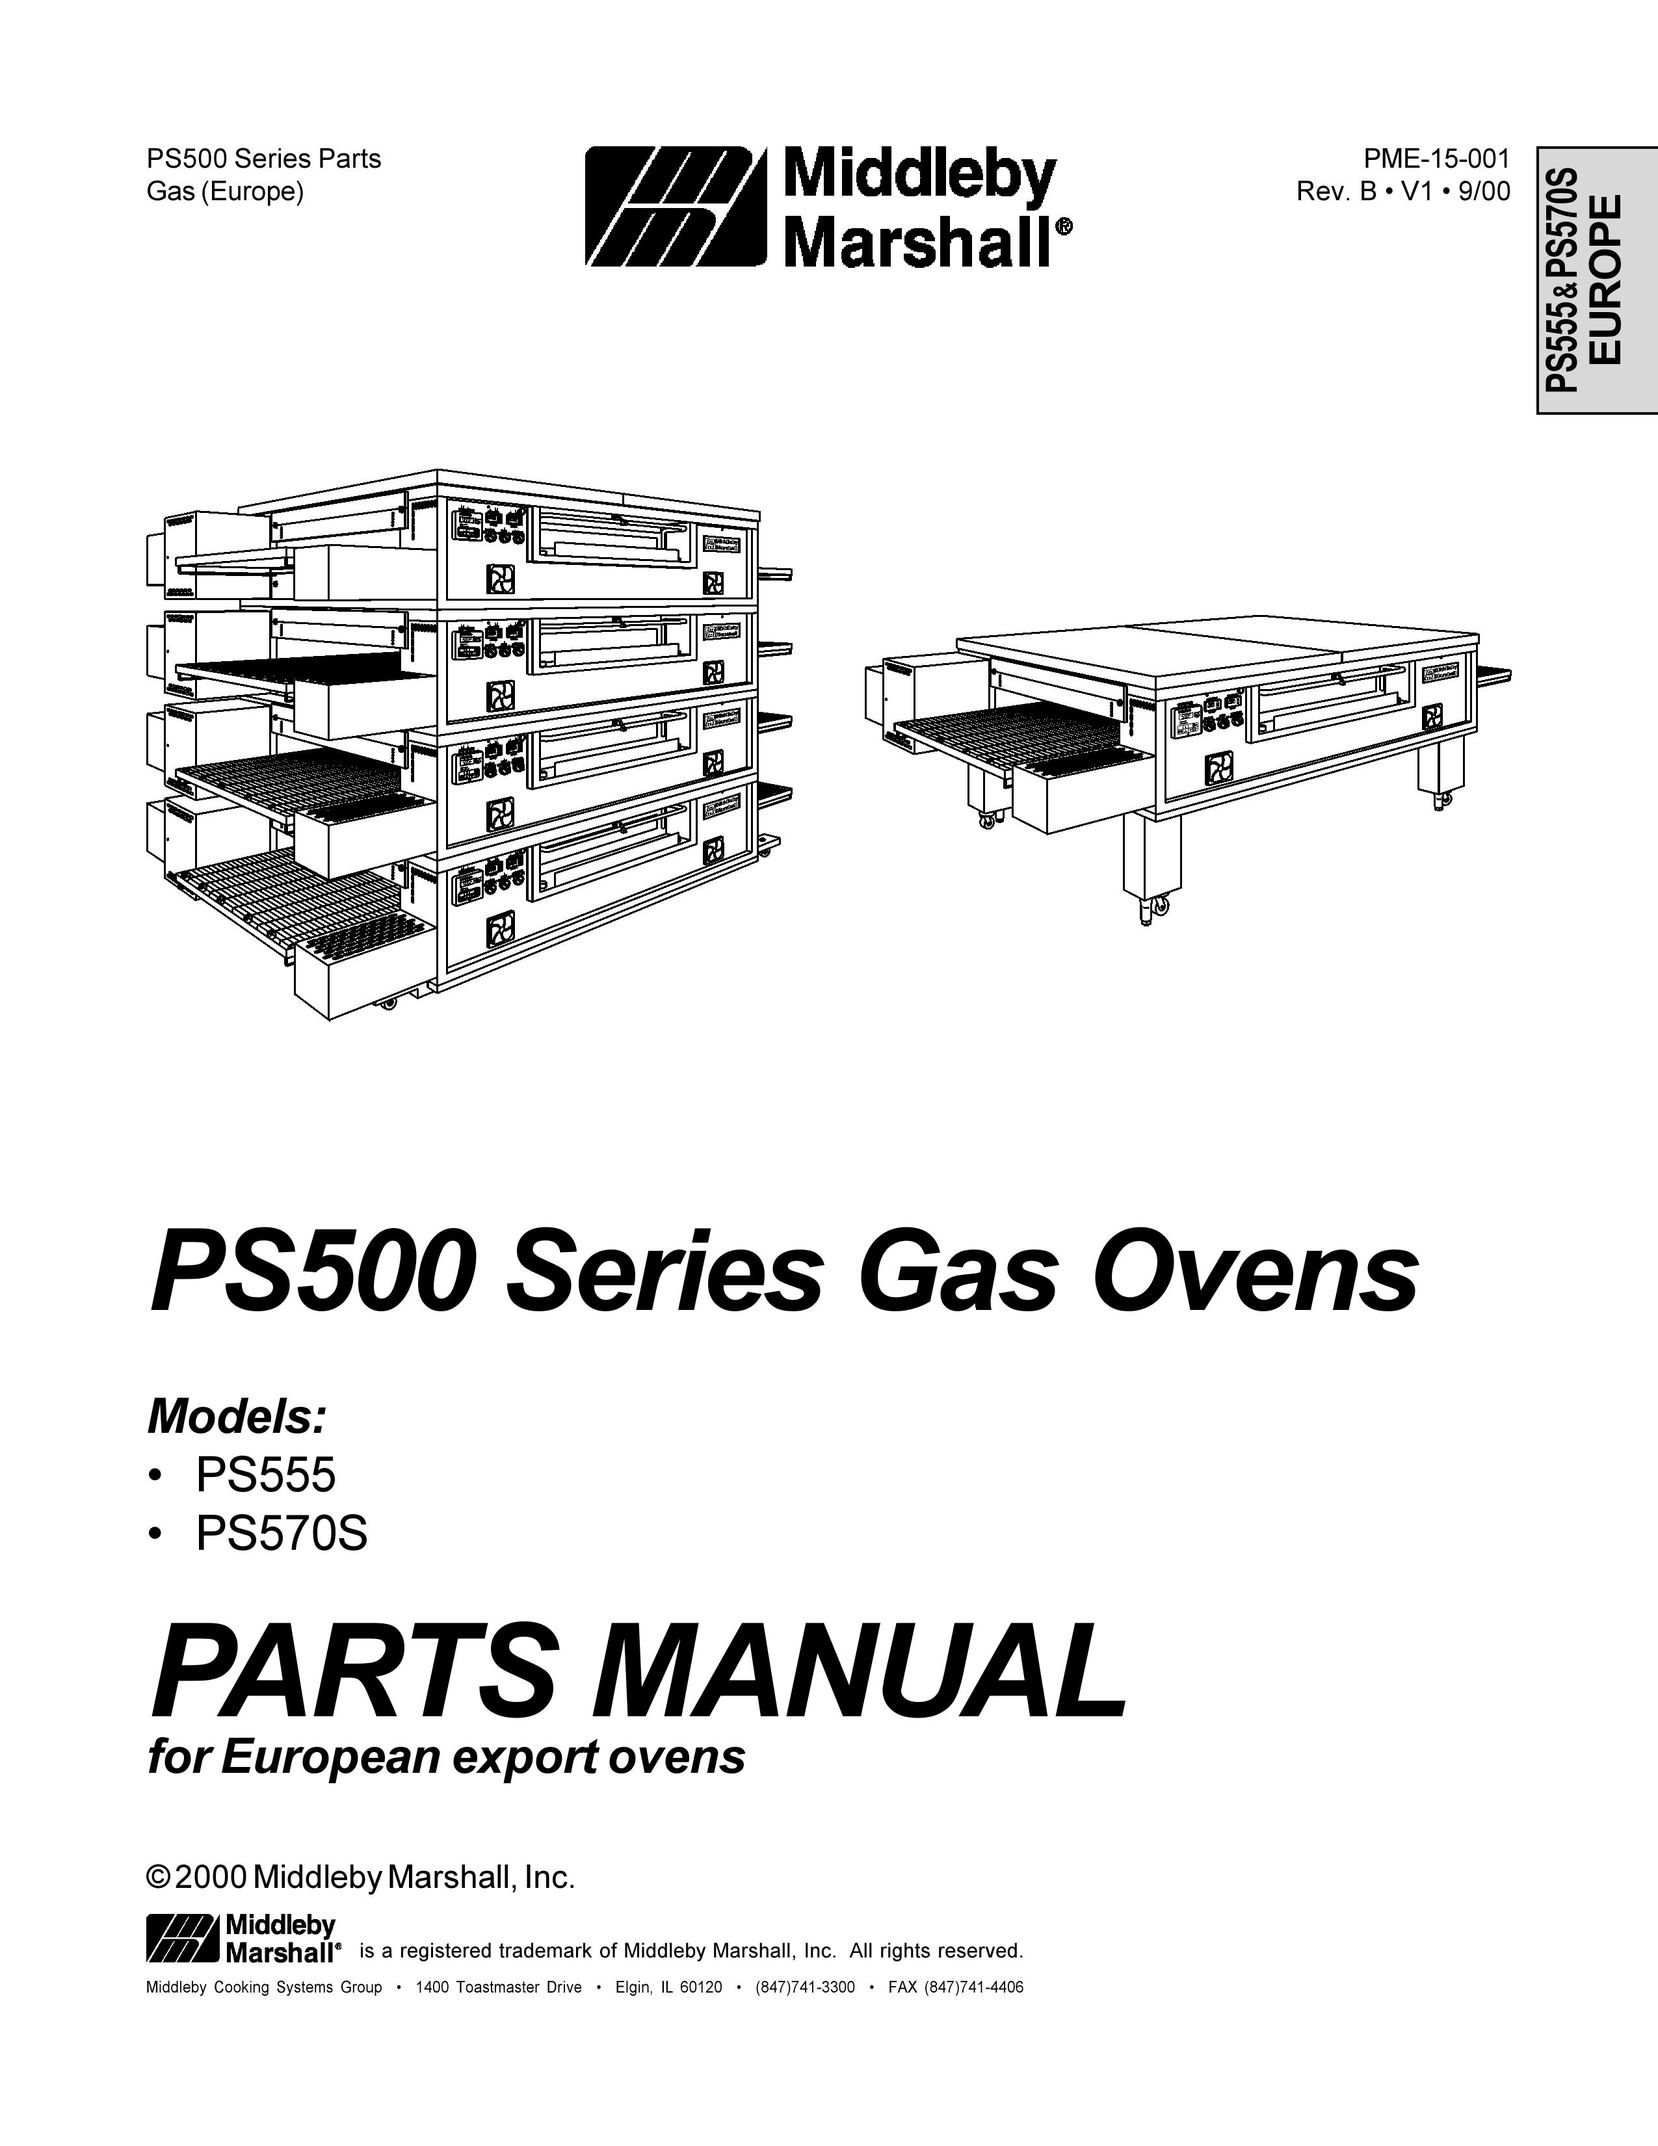 Middleby Marshall PS555 Oven User Manual